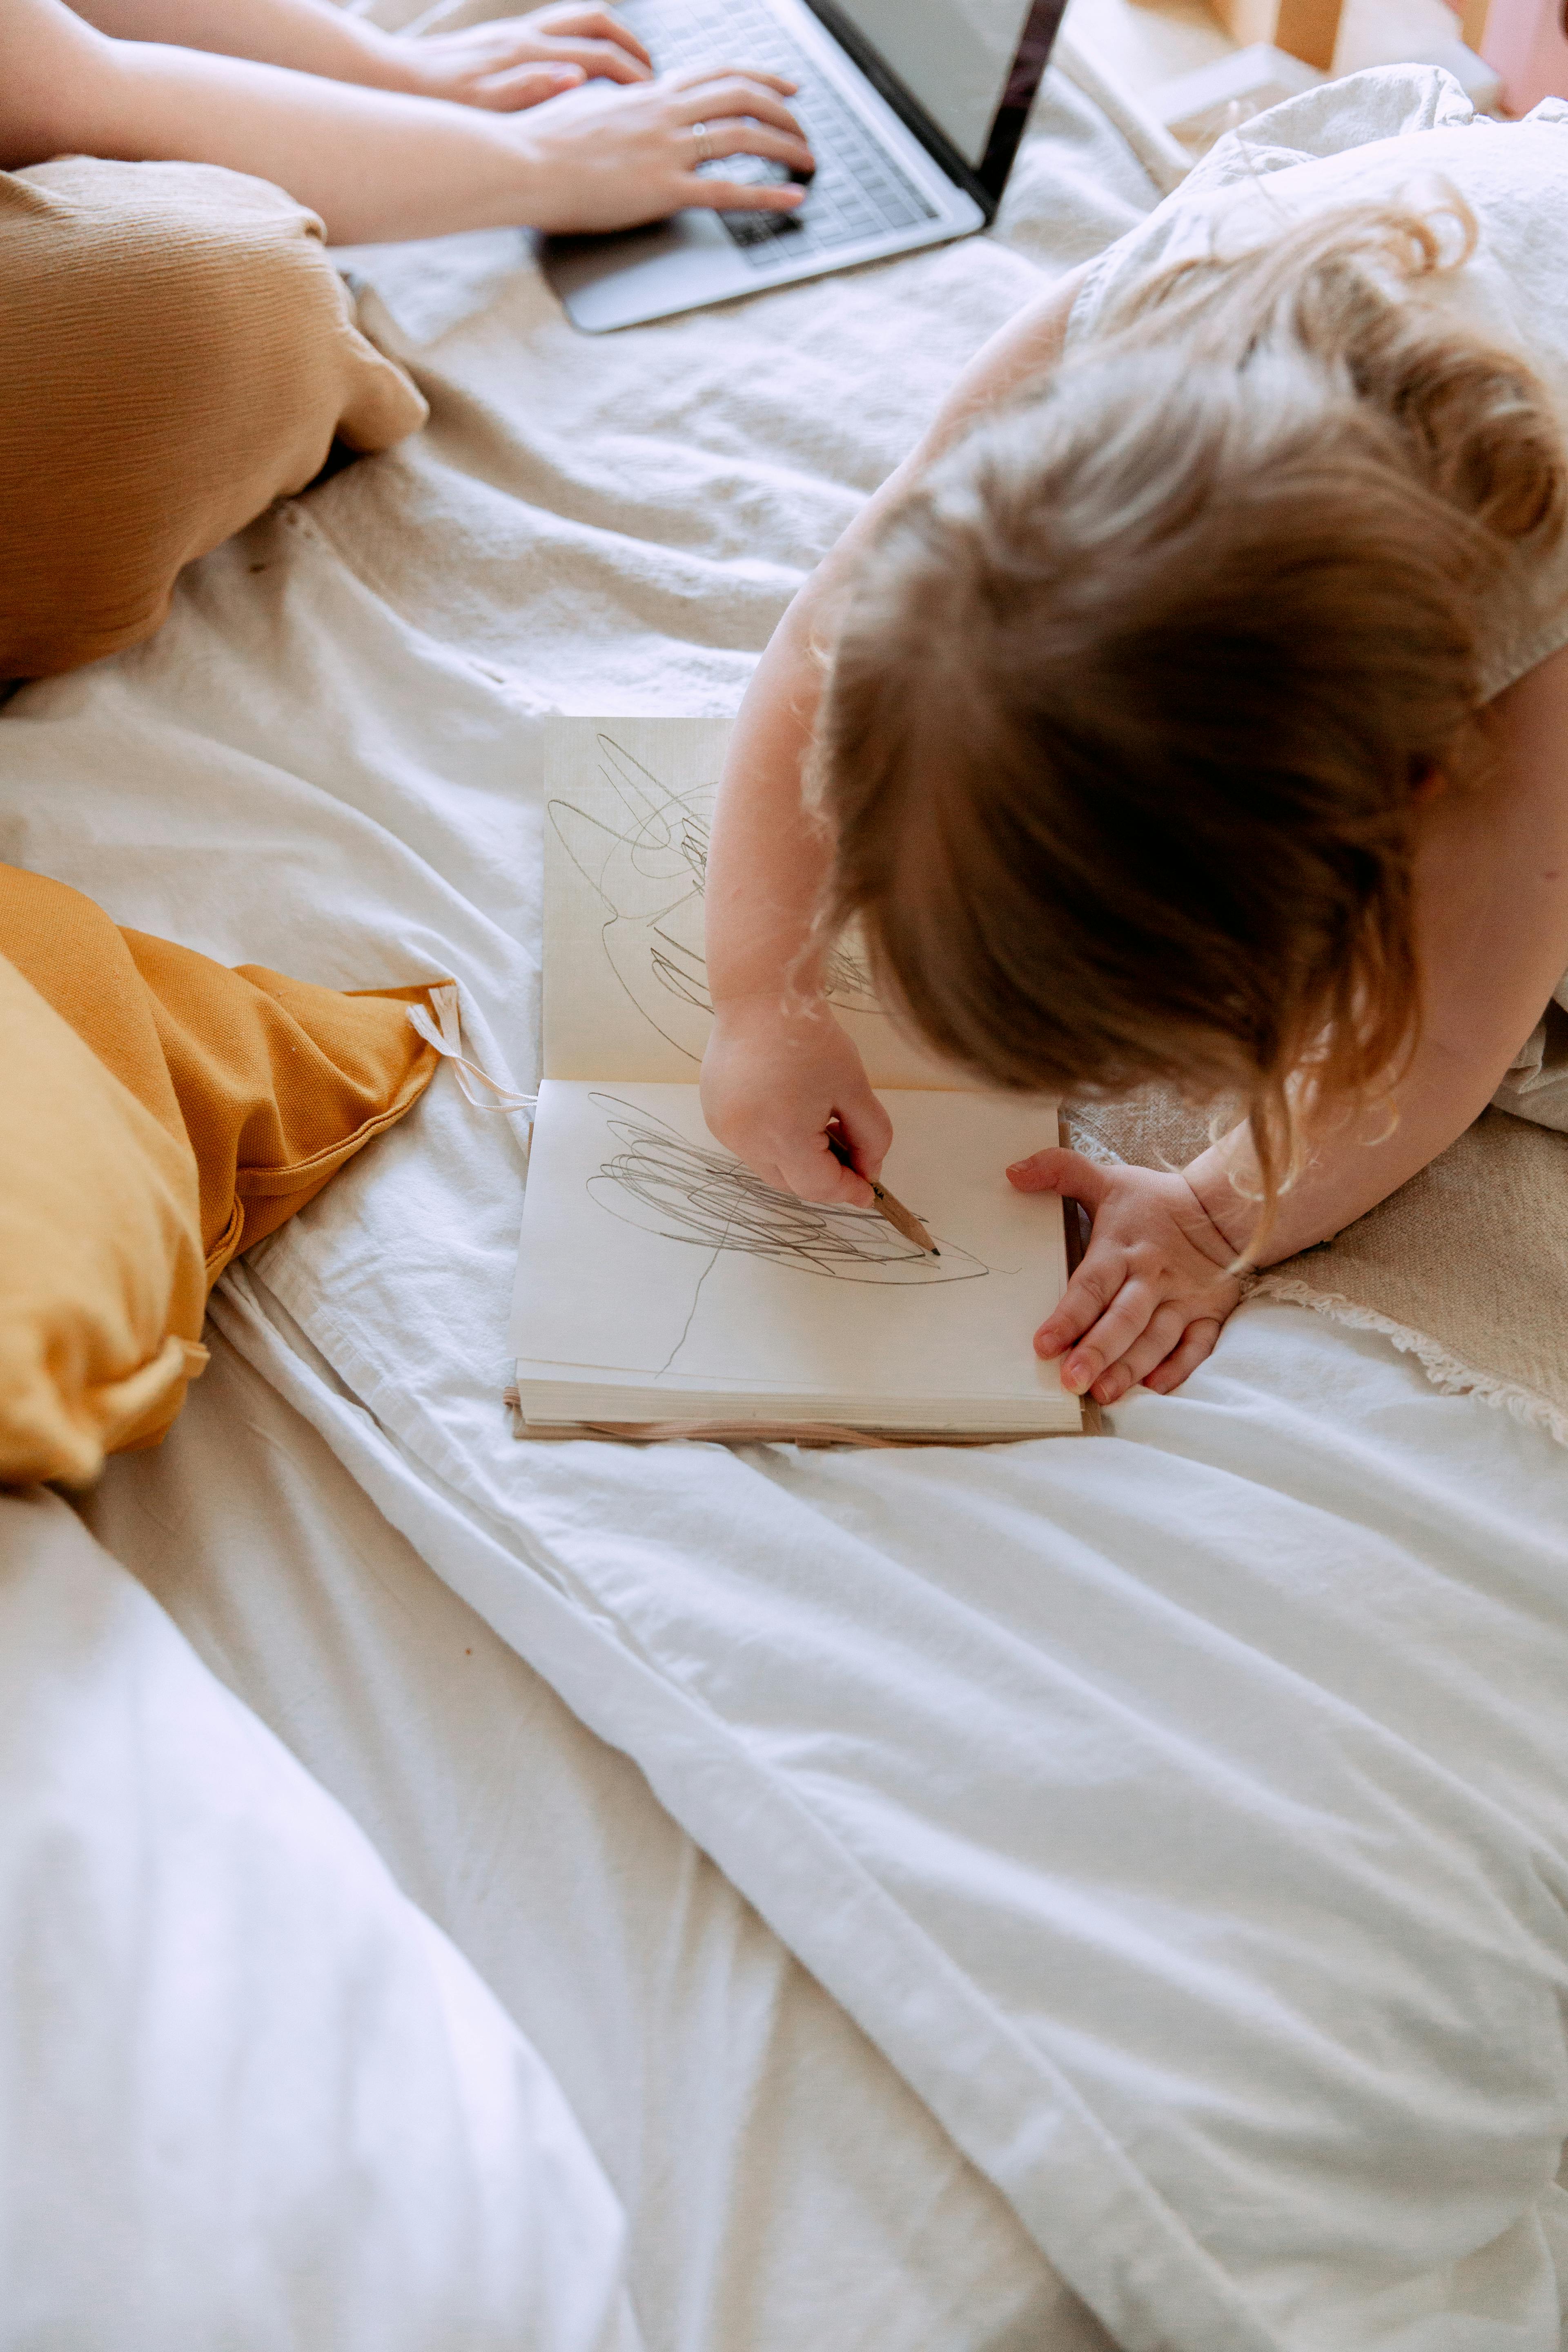 Kid draws in a notebook by his mom | Source: Pexels